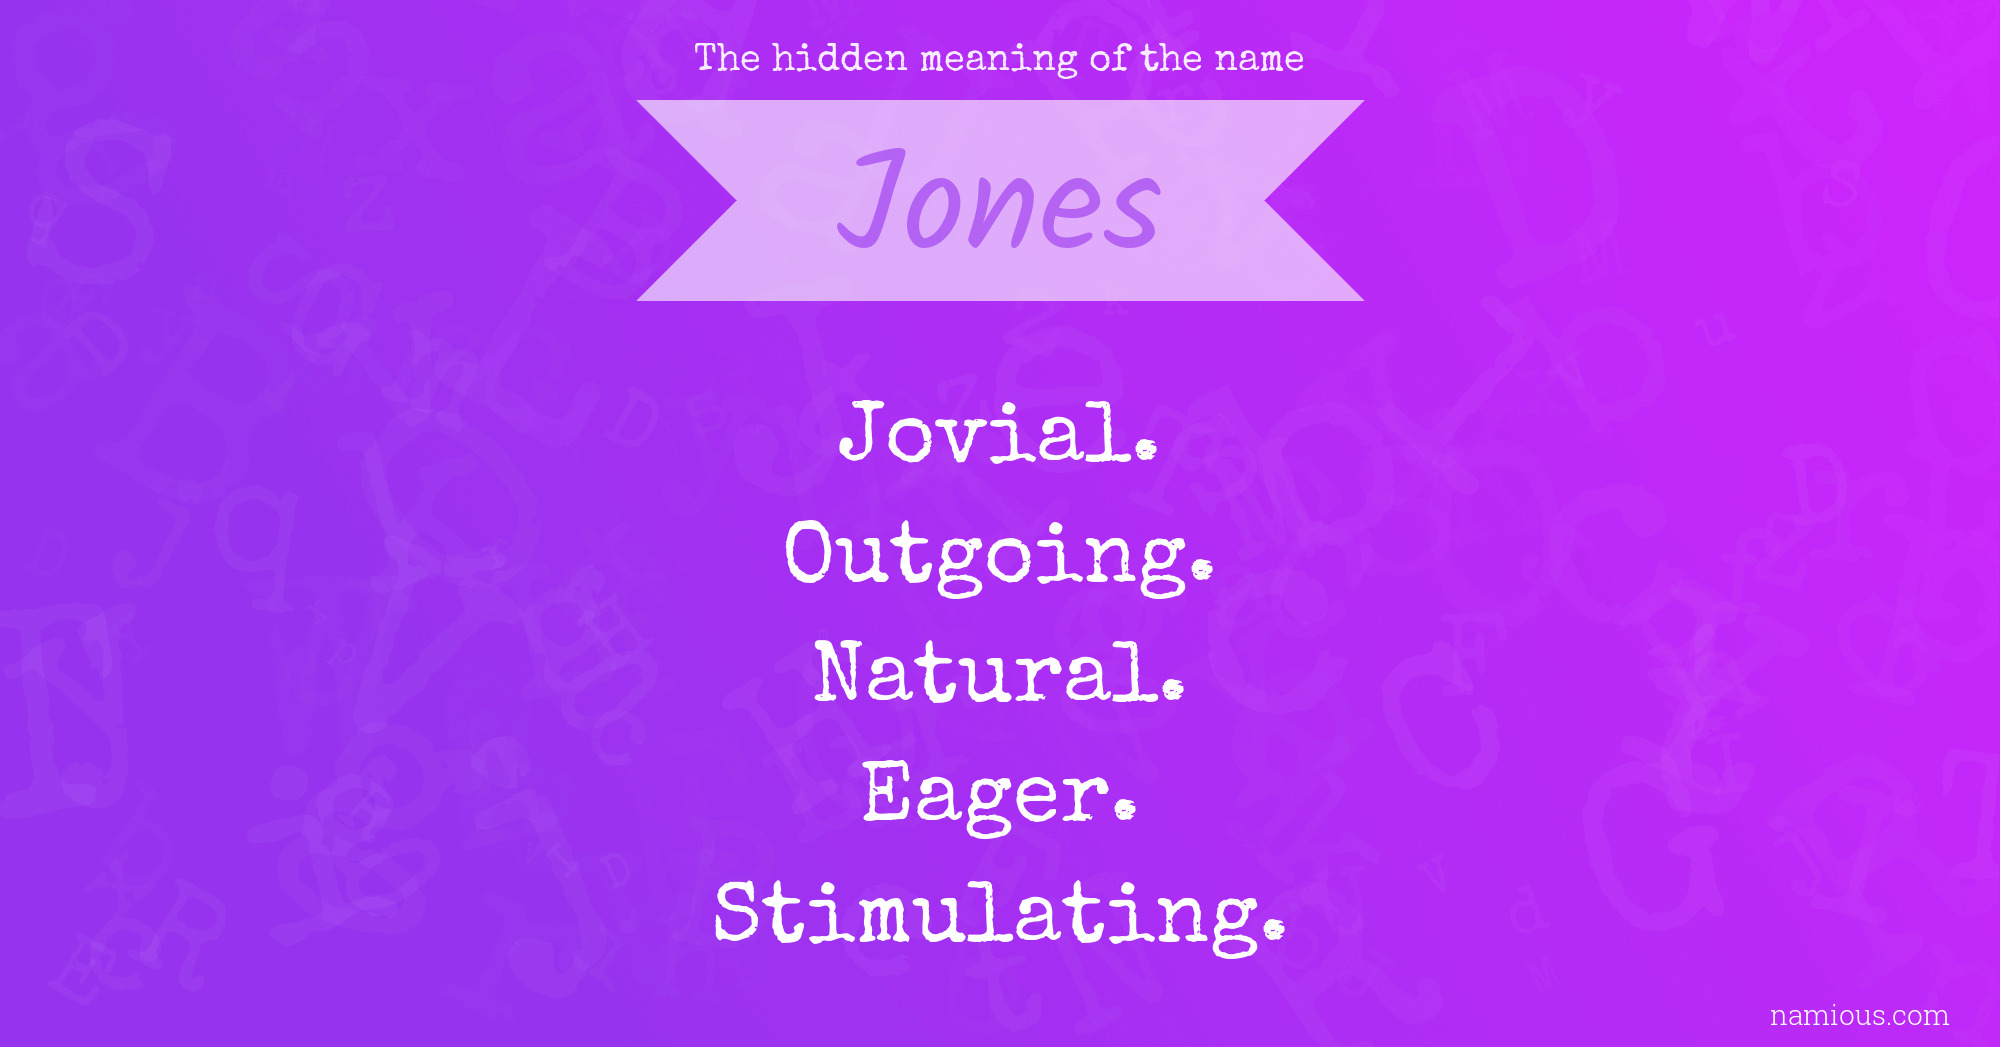 The hidden meaning of the name Jones